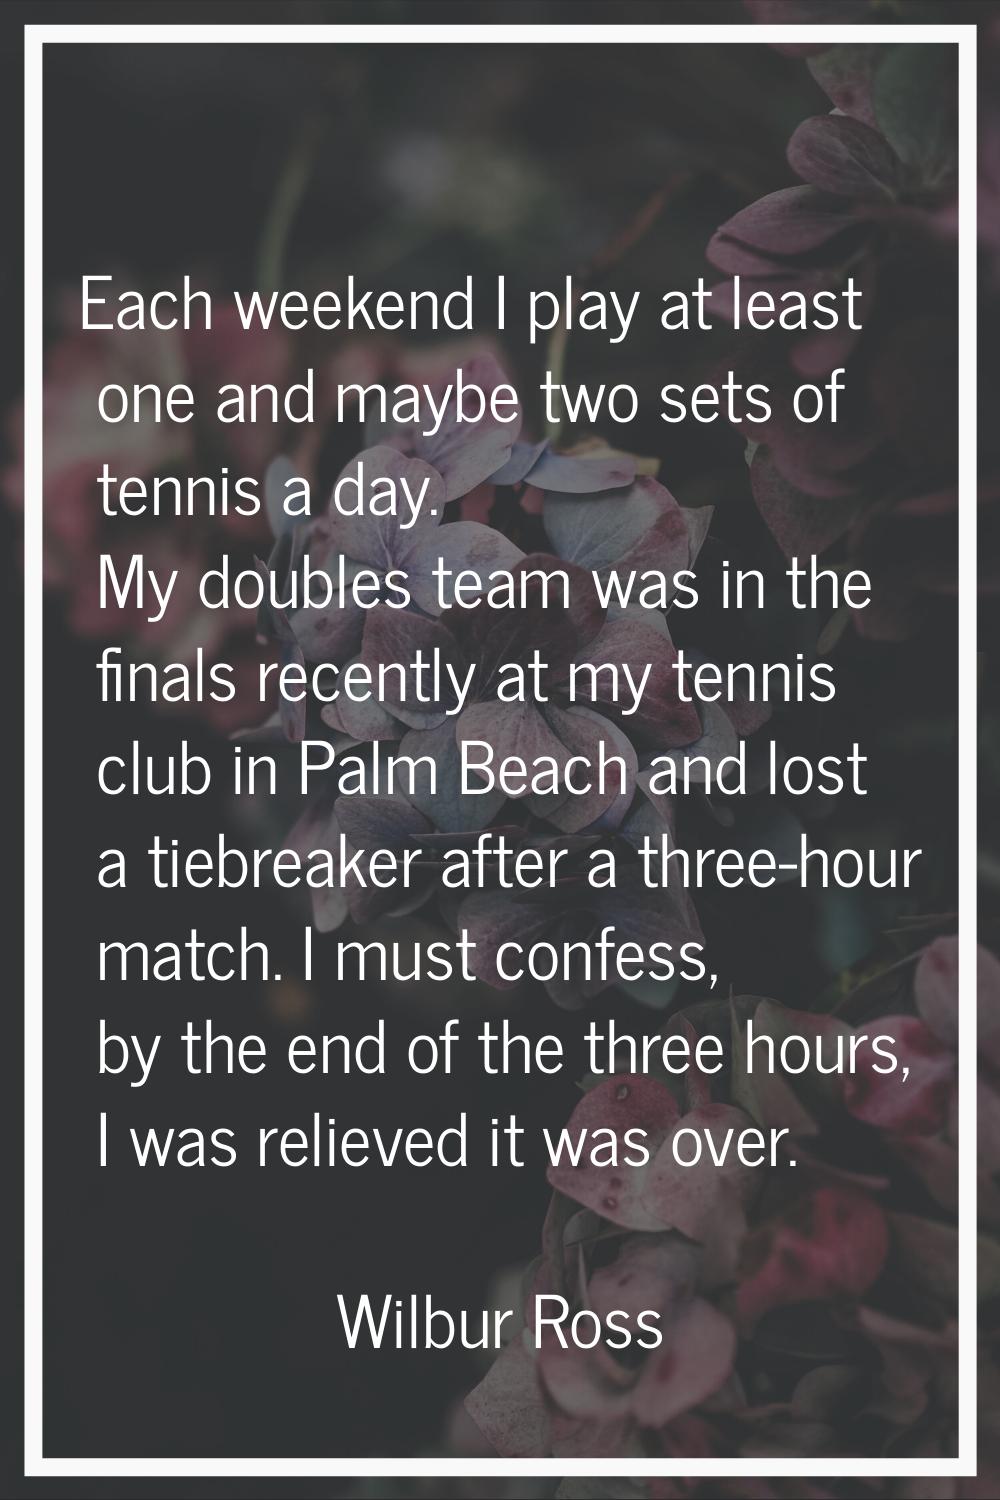 Each weekend I play at least one and maybe two sets of tennis a day. My doubles team was in the fin